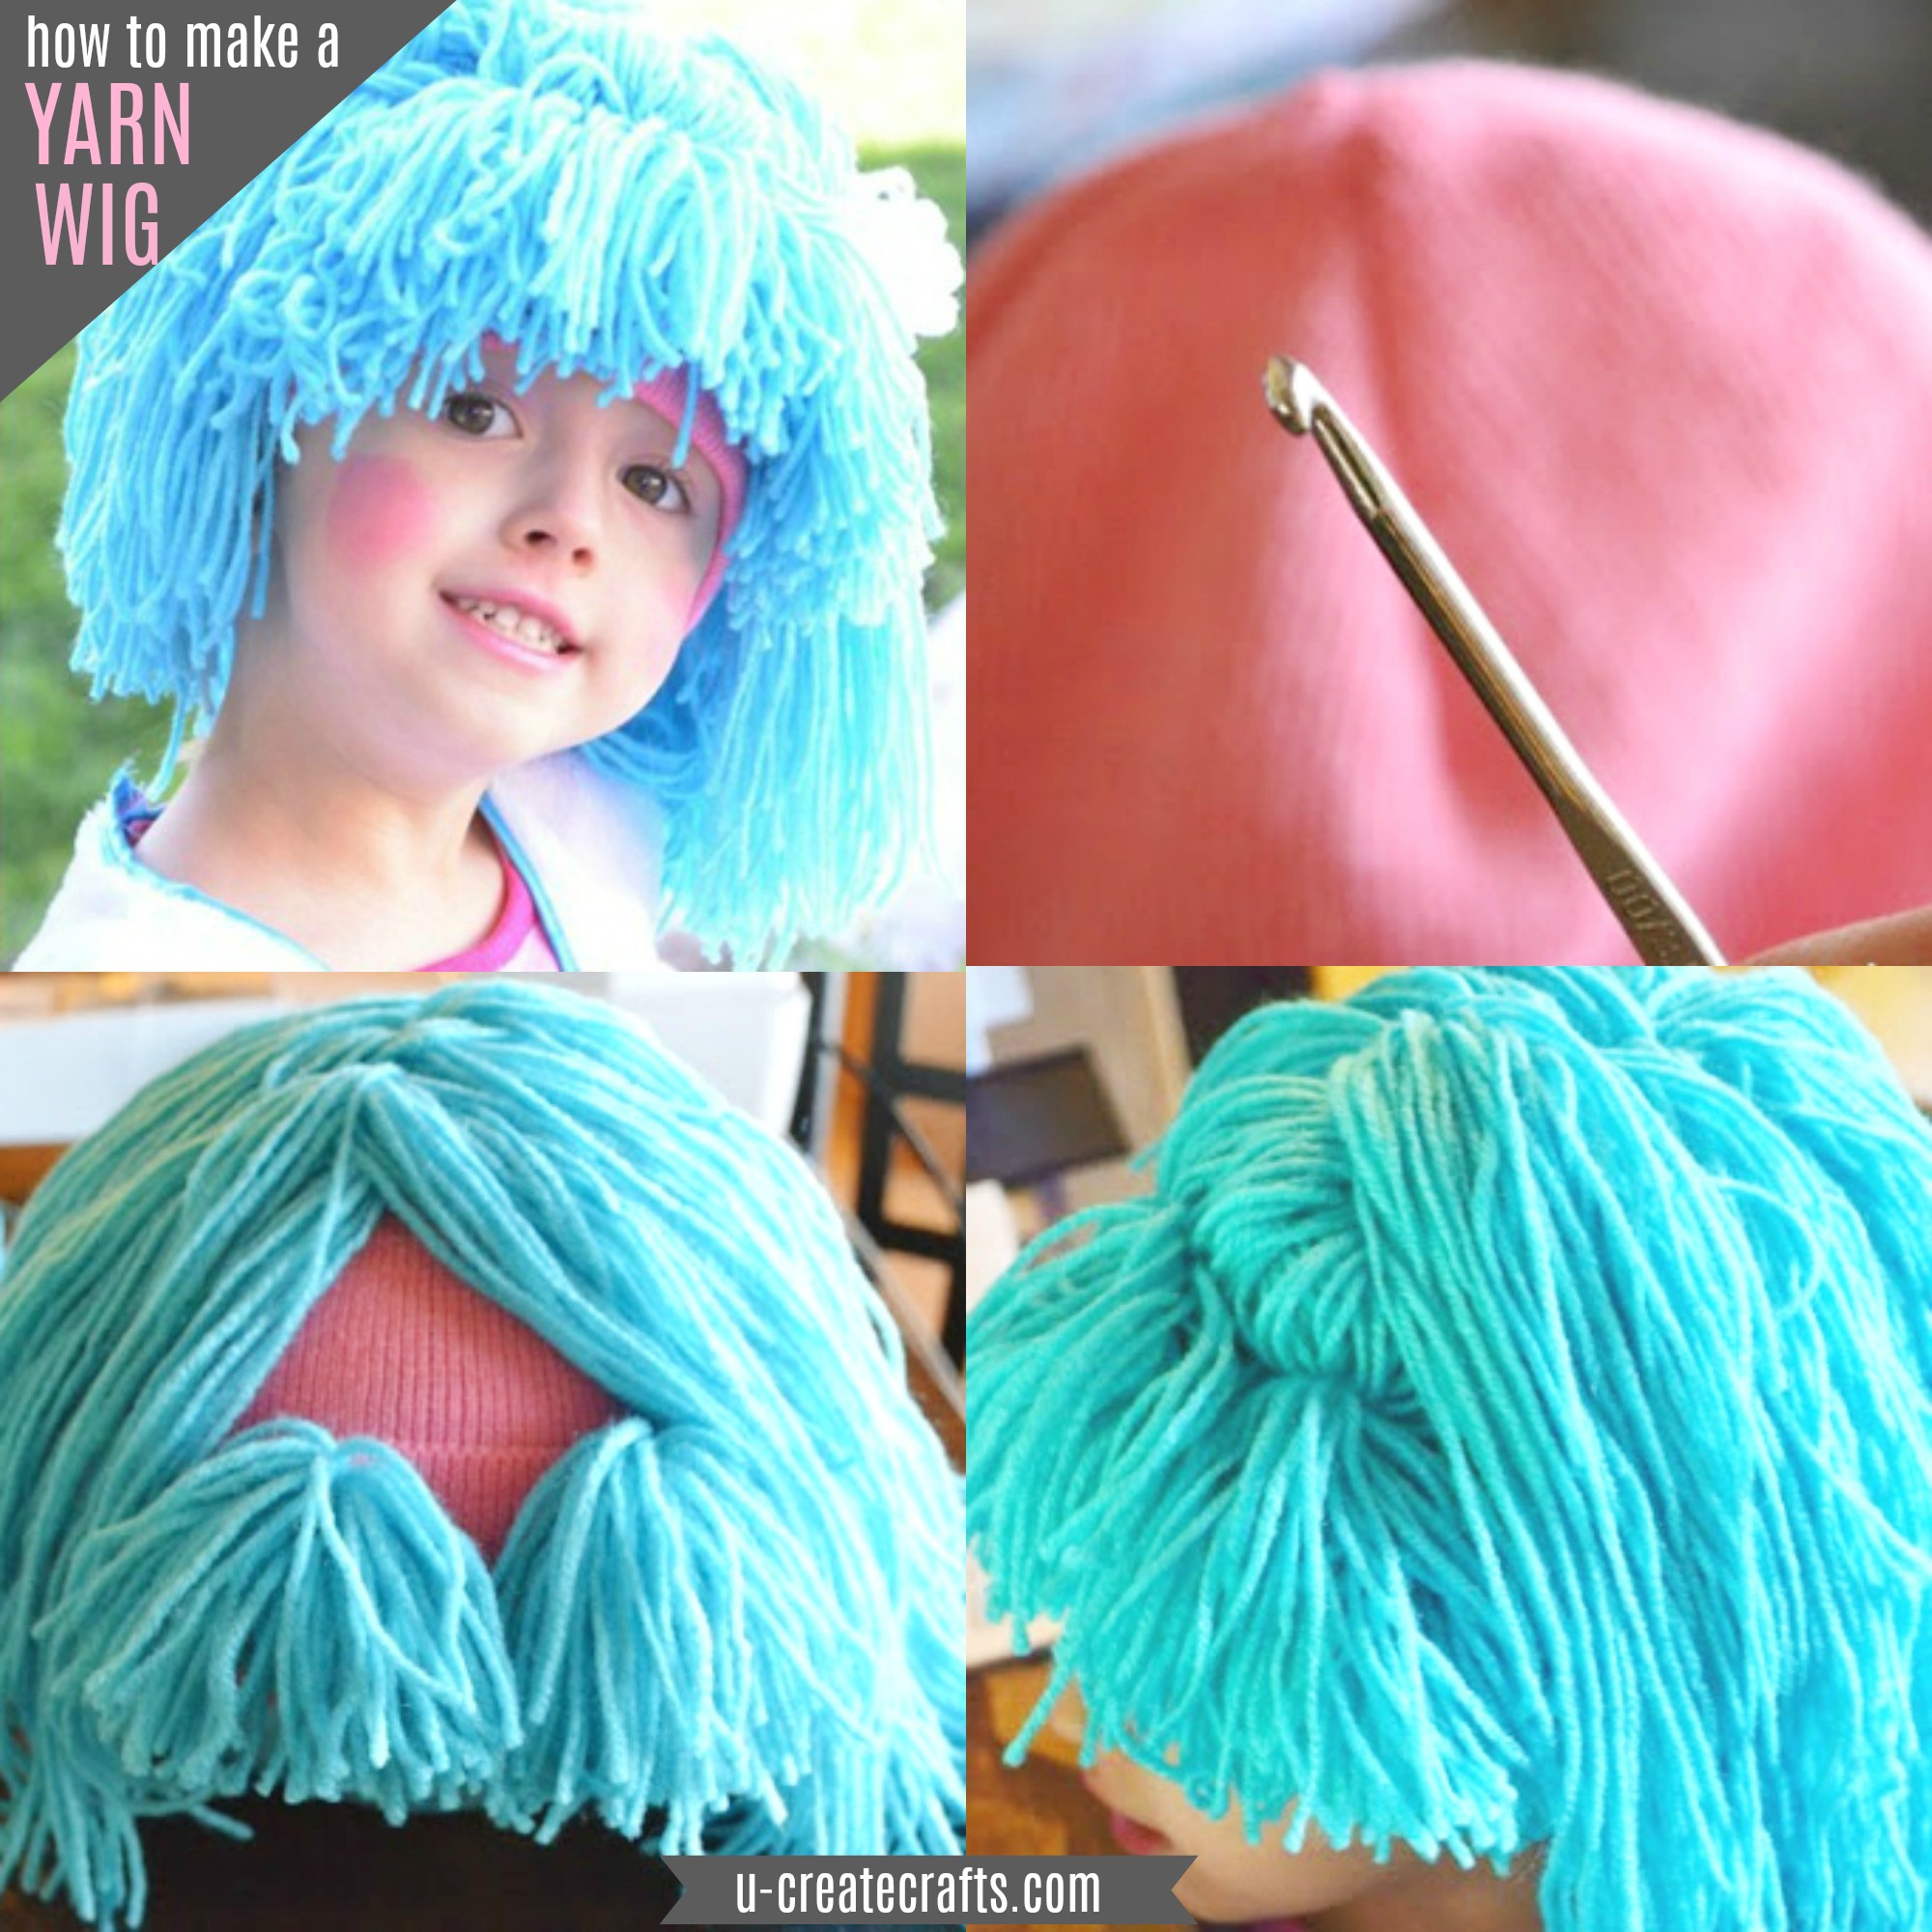 How to make a yarn wig for Halloween costumes!